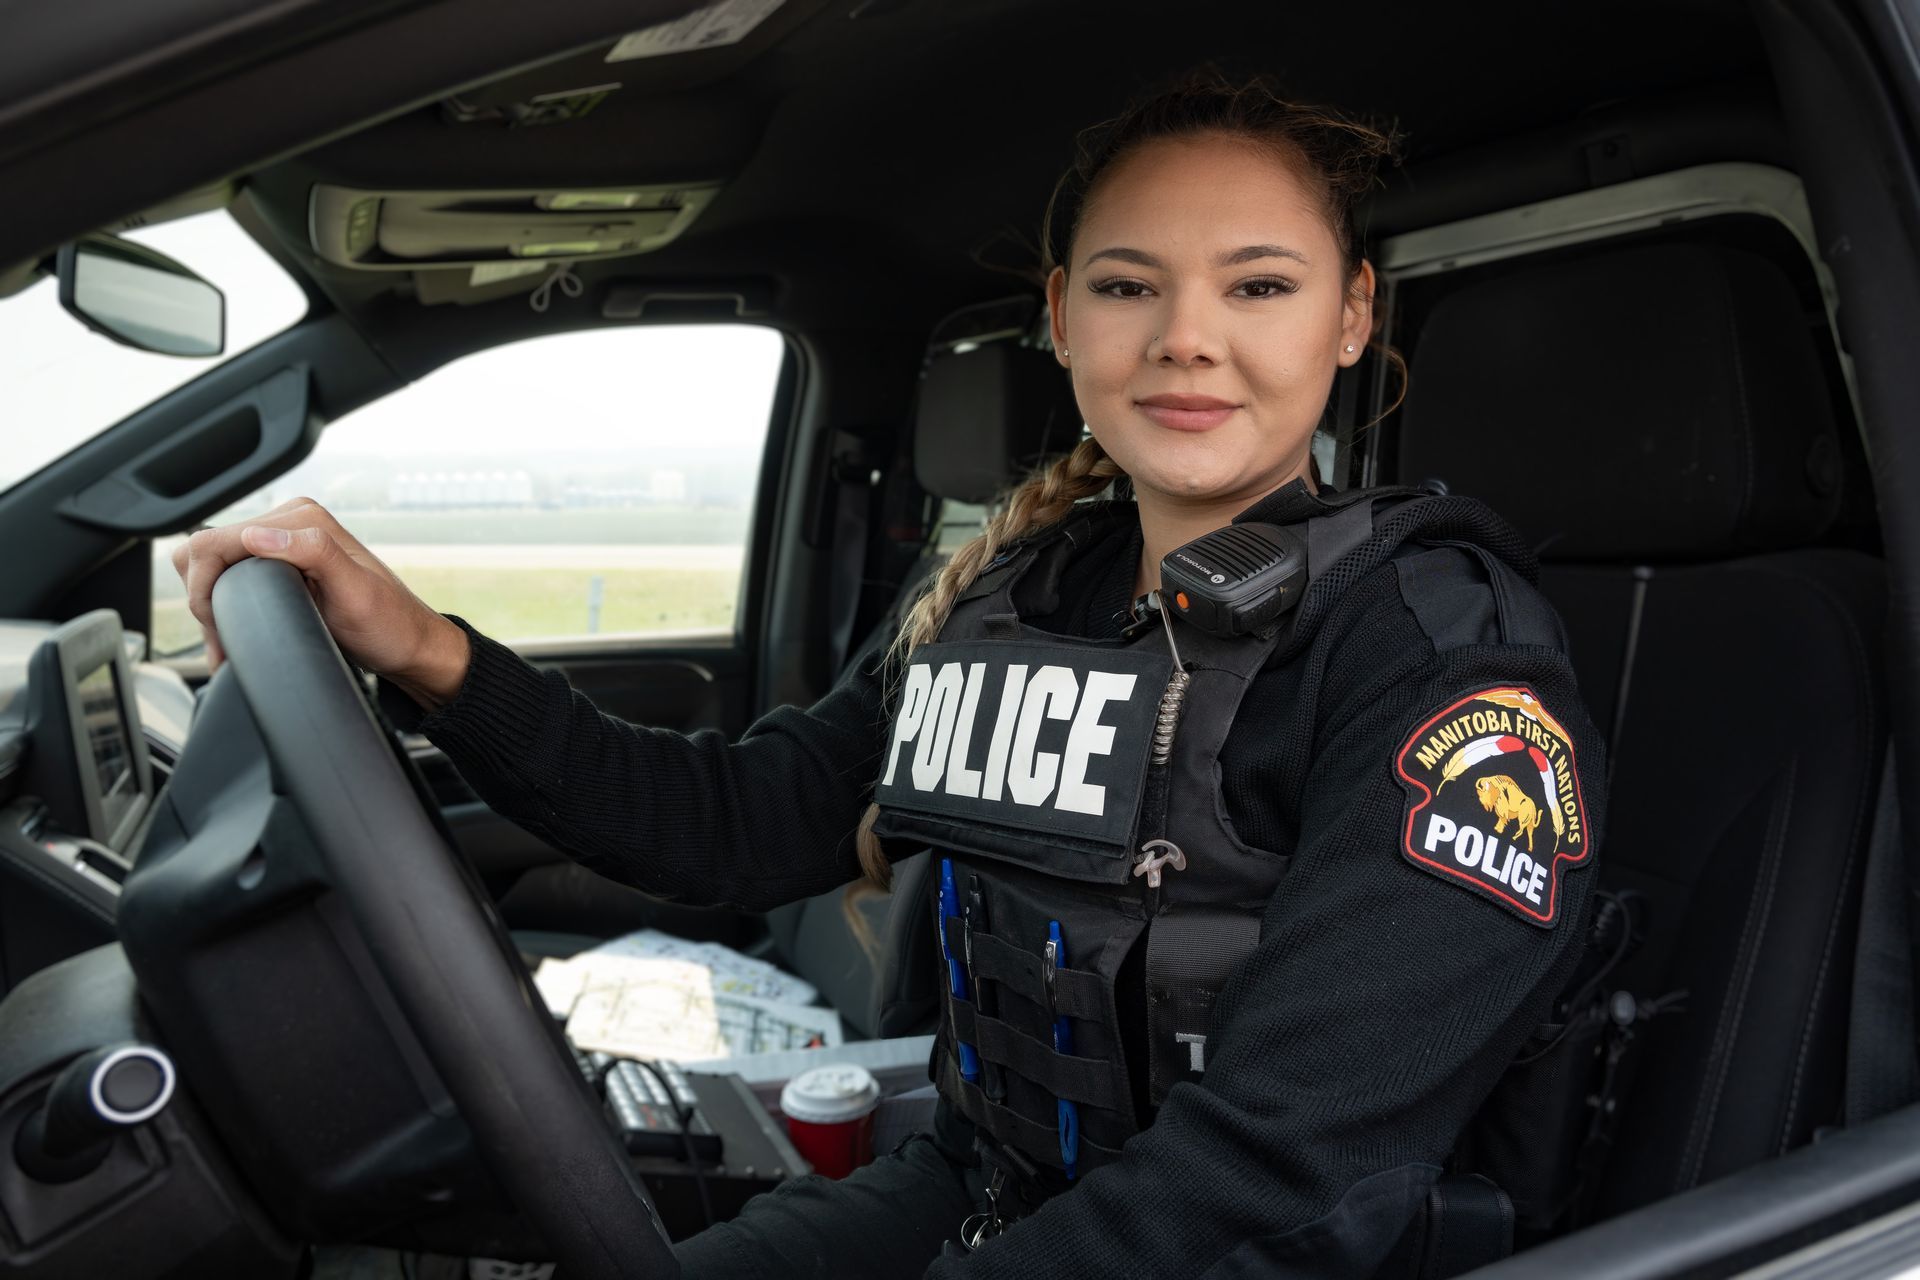 MFNPS-Manitoba First Nations Police Service New Officer Recruiting